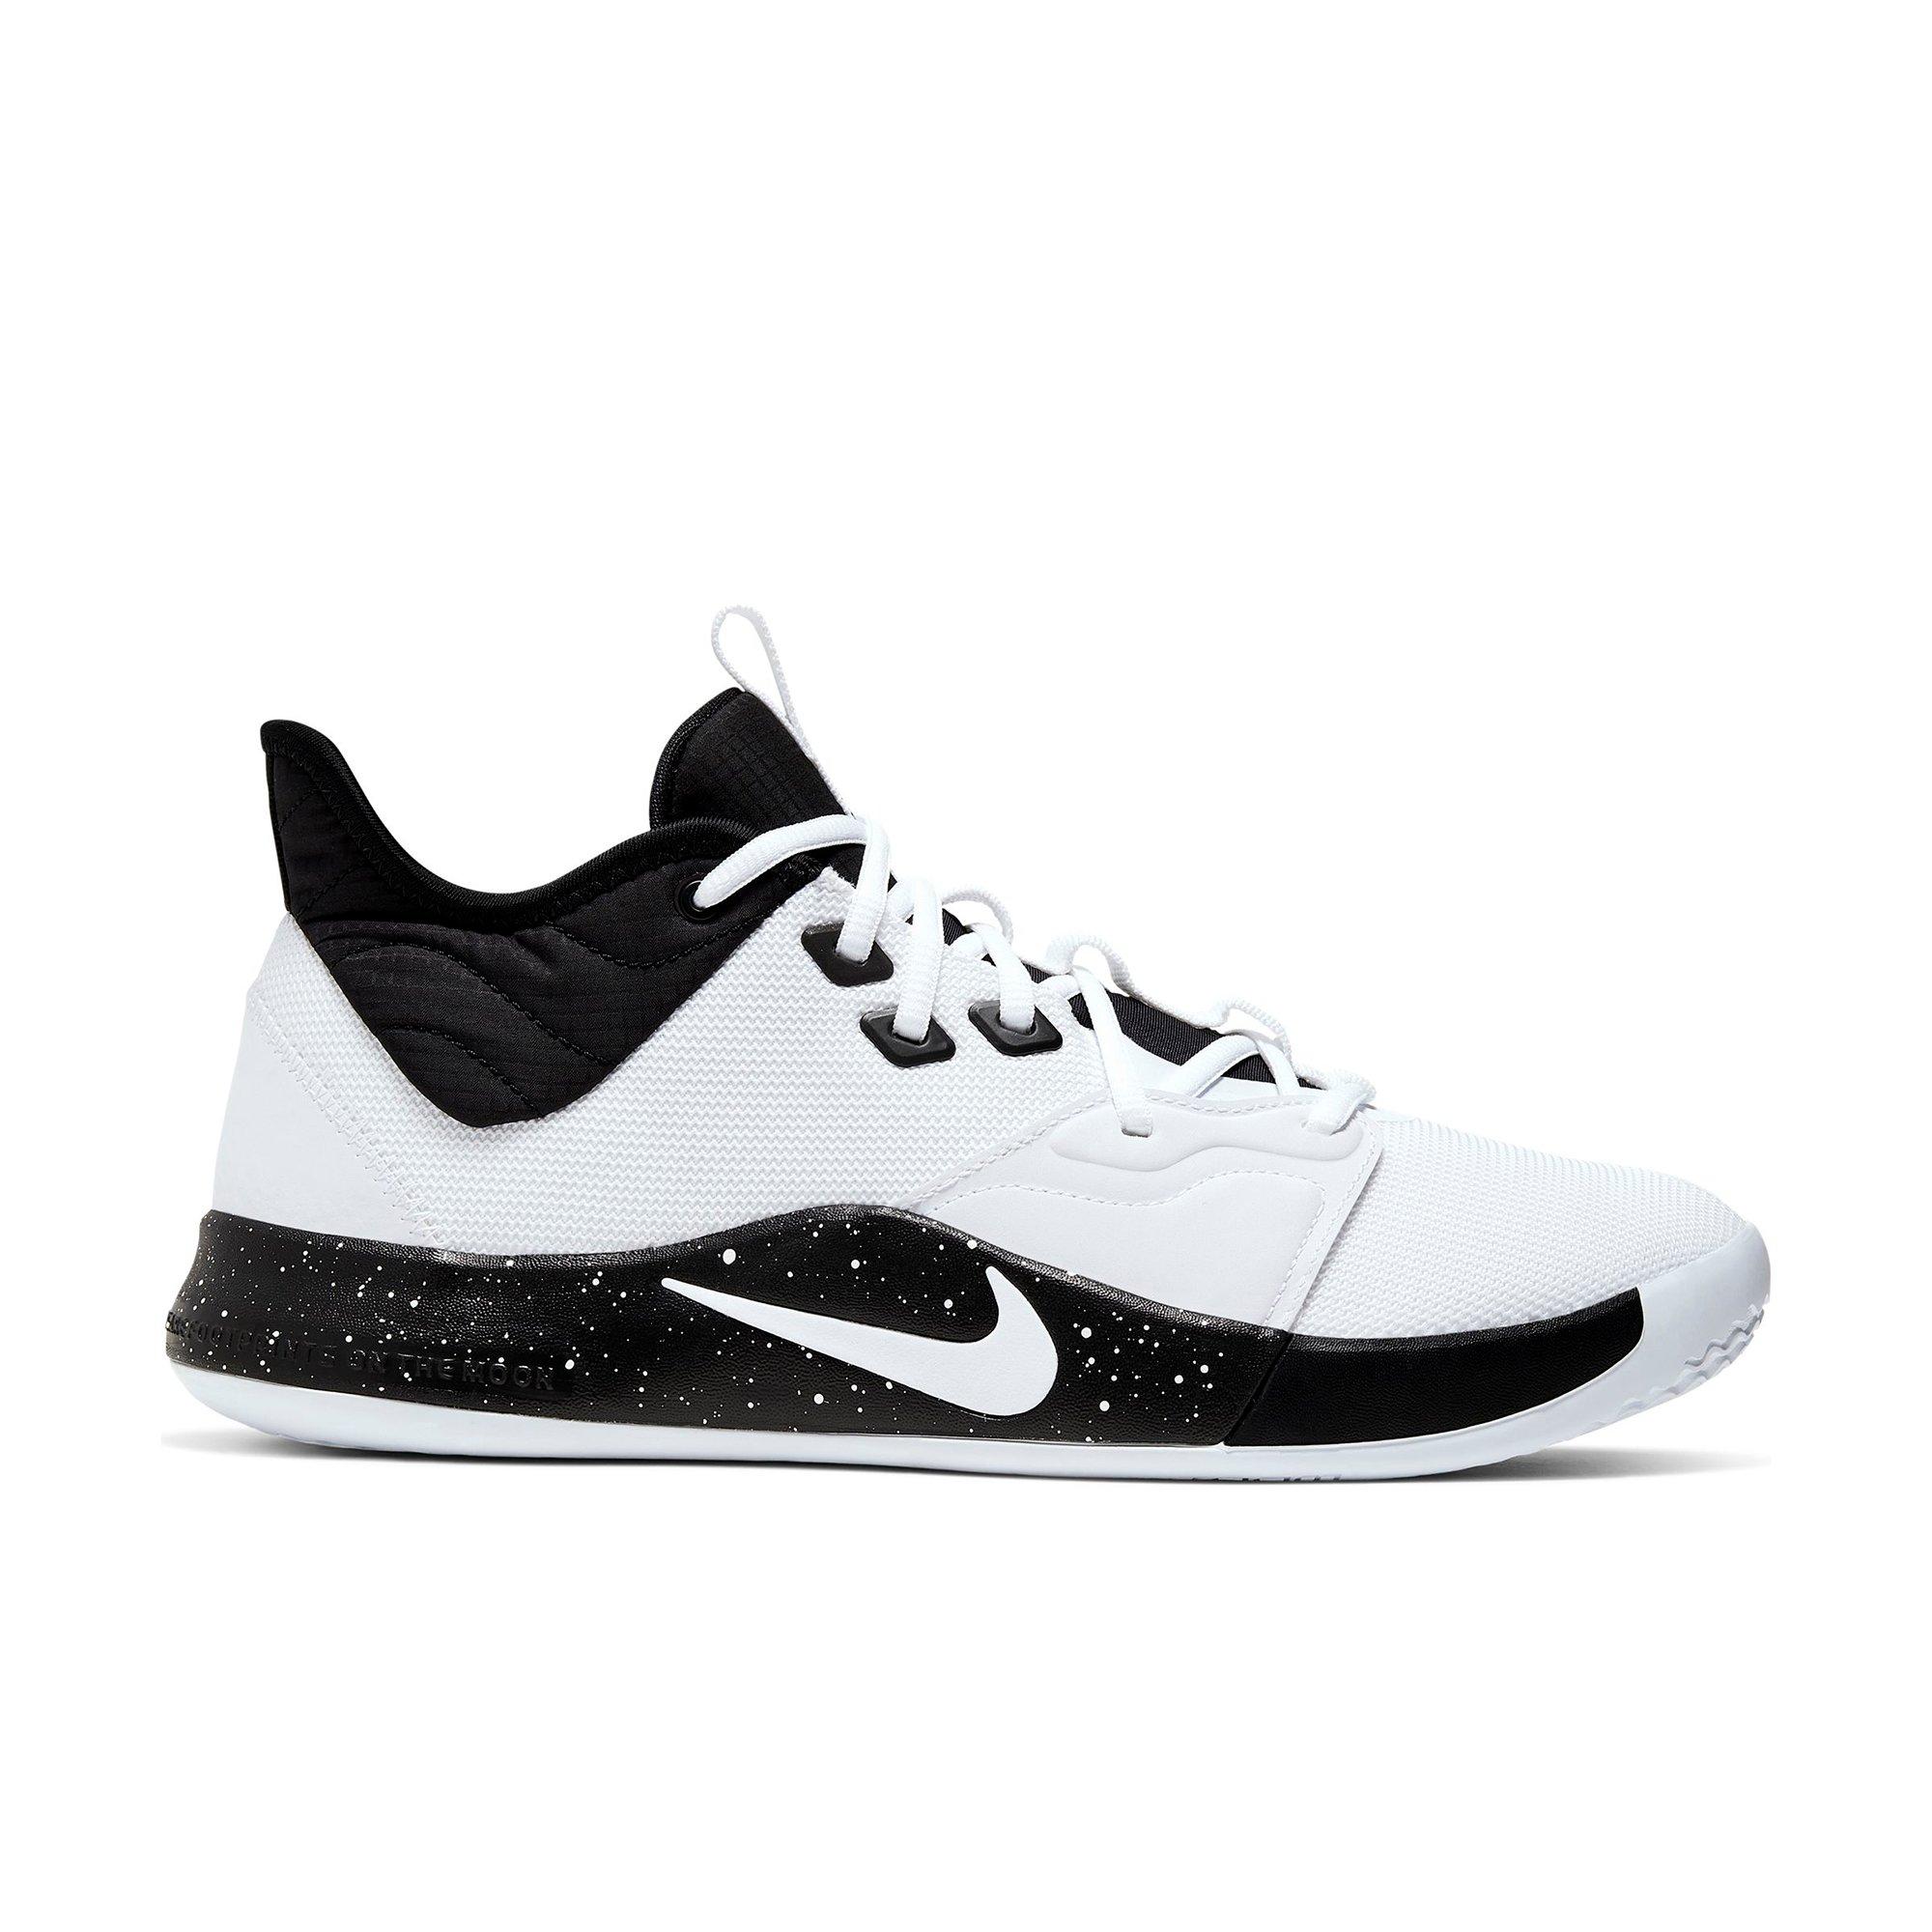 paul george shoes black and white